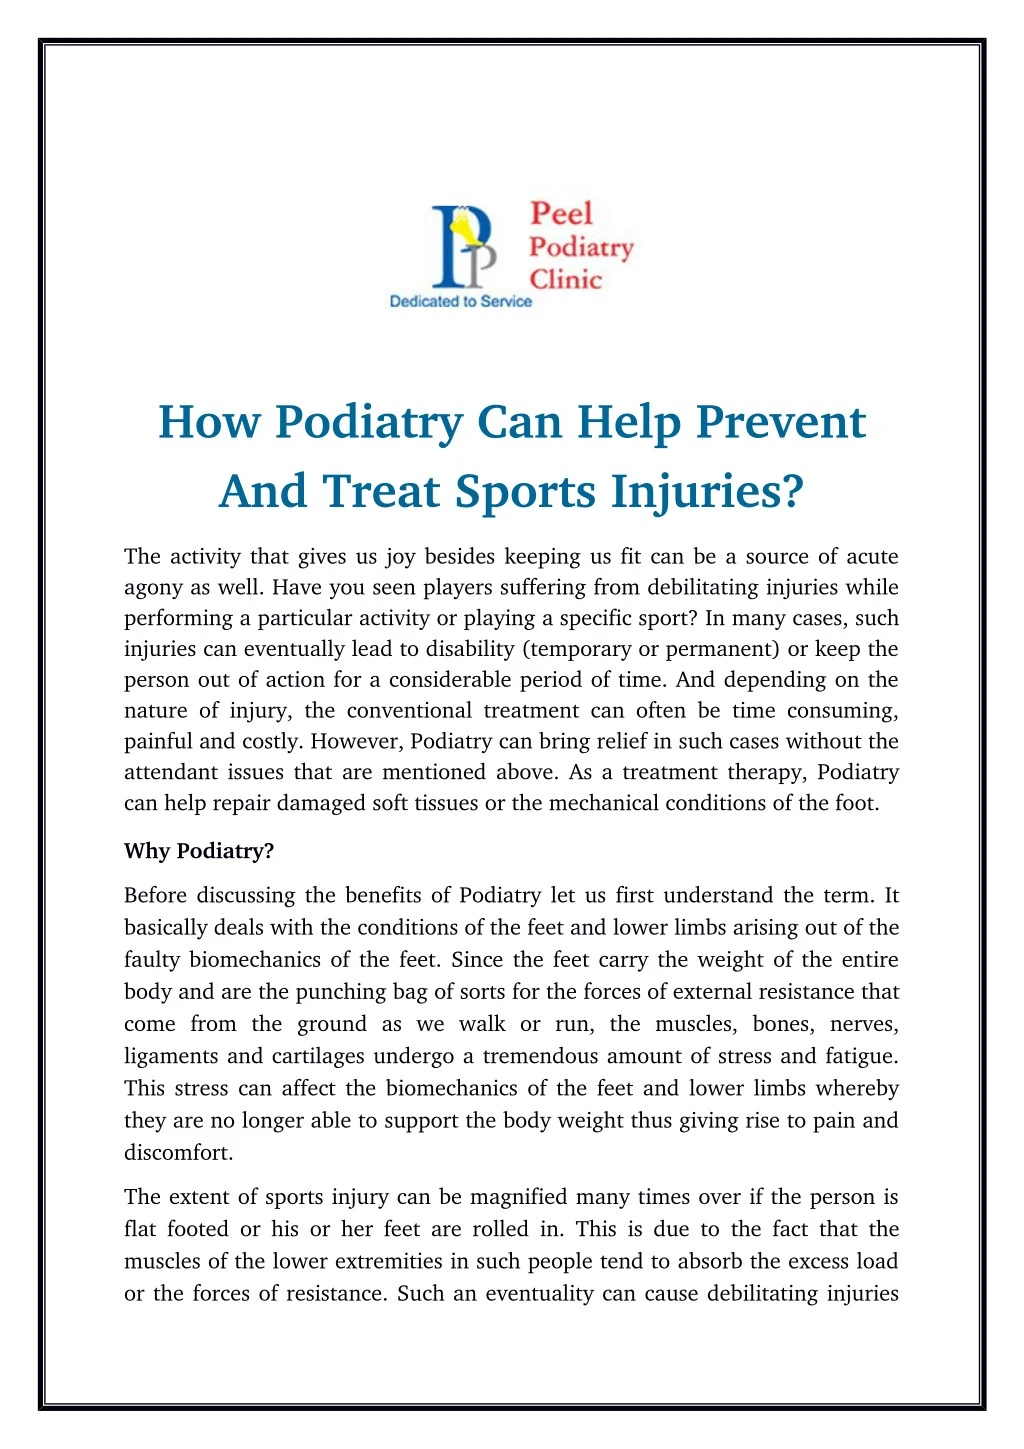 how podiatry can help prevent and treat sports